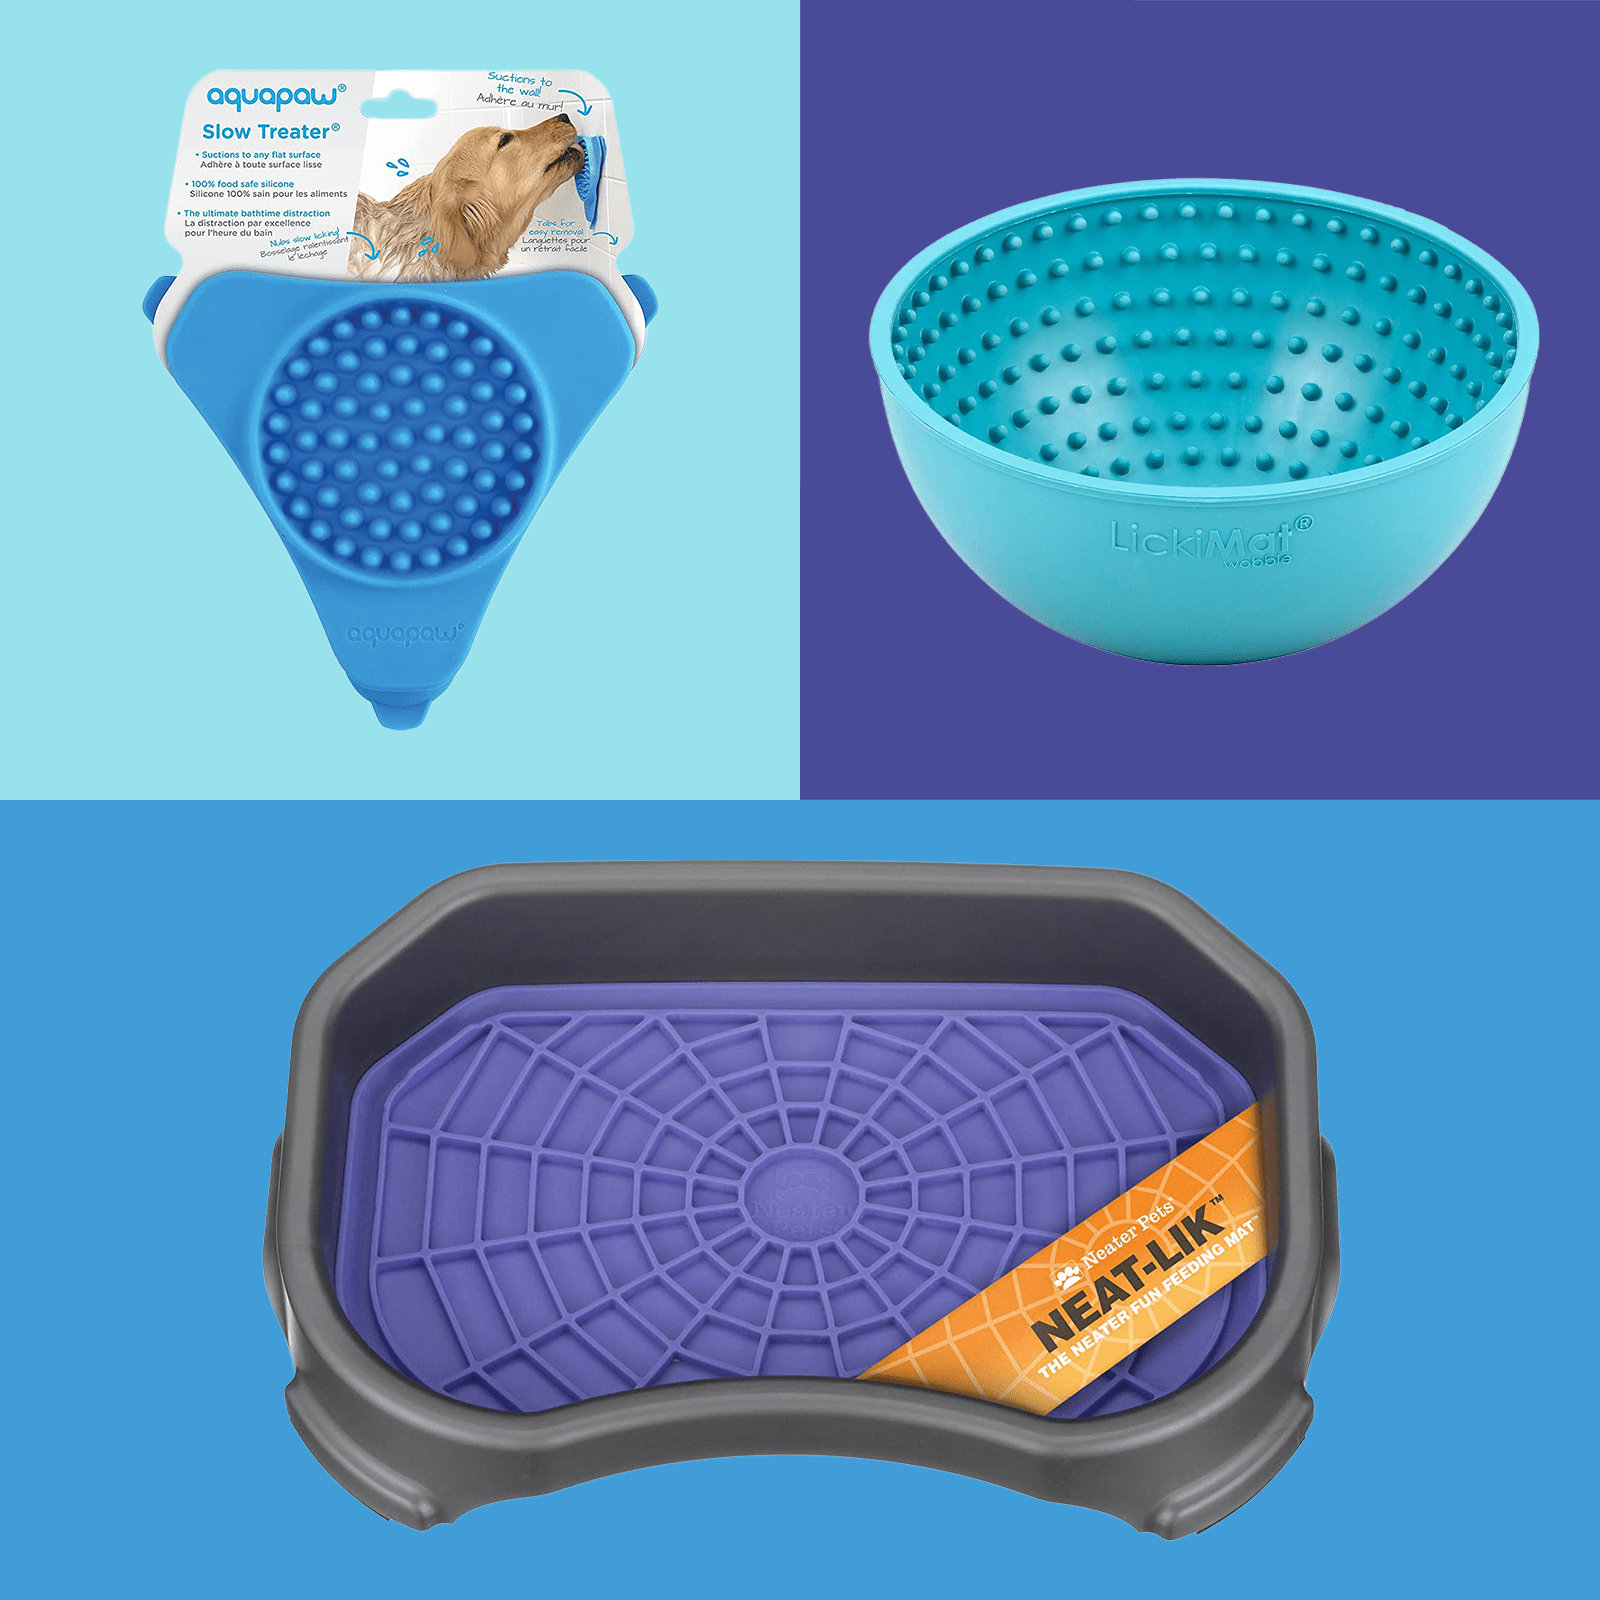 Pros and Cons of Different Dog Bowl Materials – Neater Pets